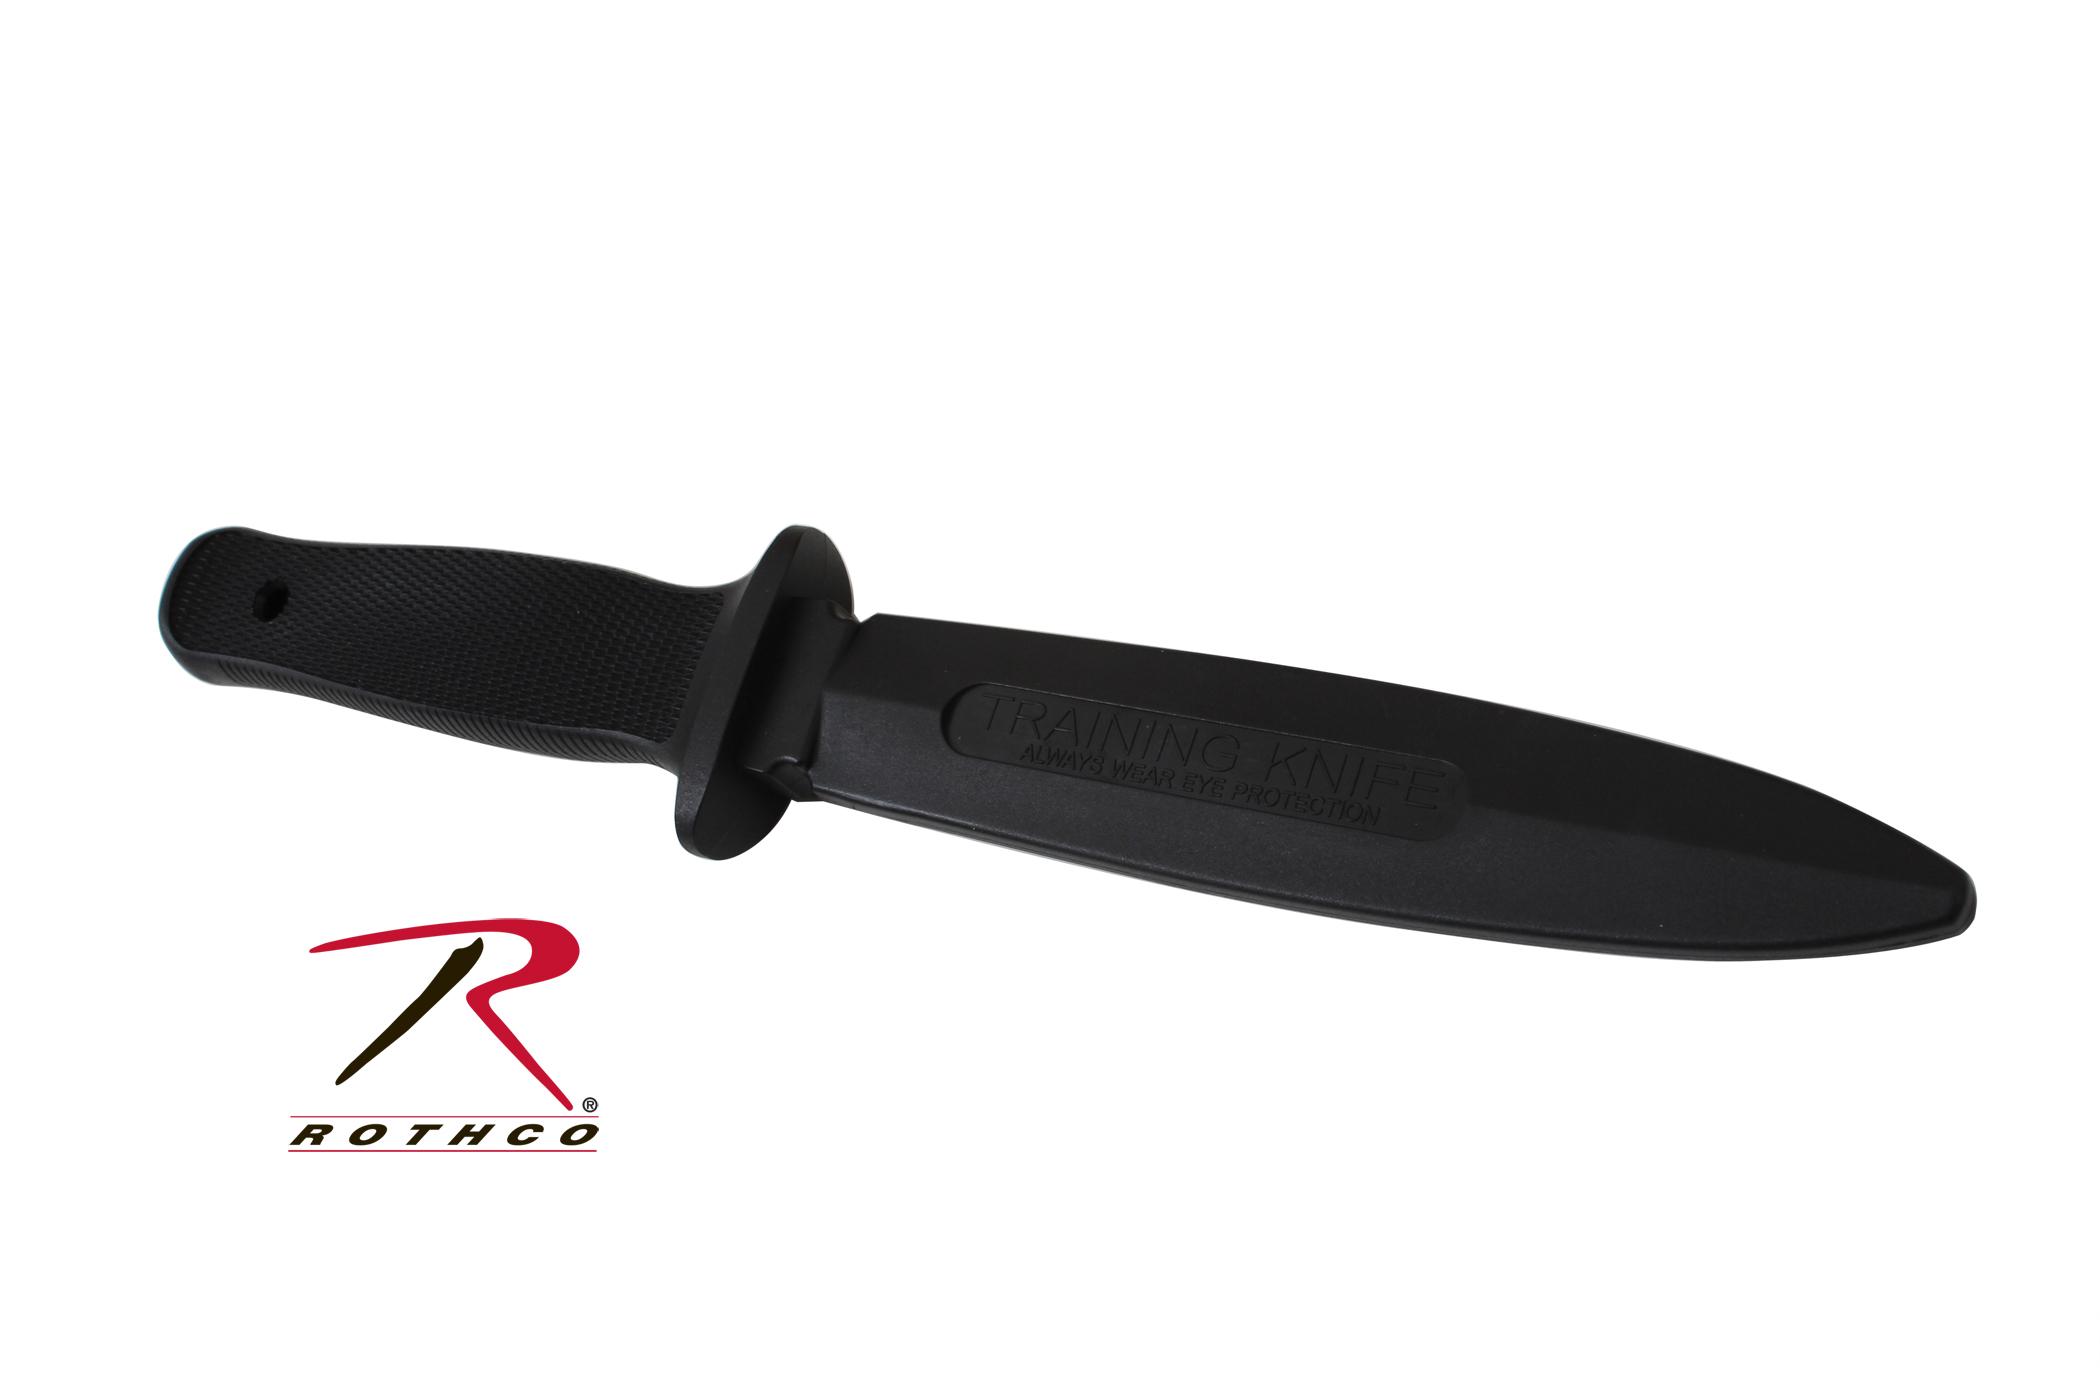 Cold Steel Peace Keeper I Rubber Training Knife